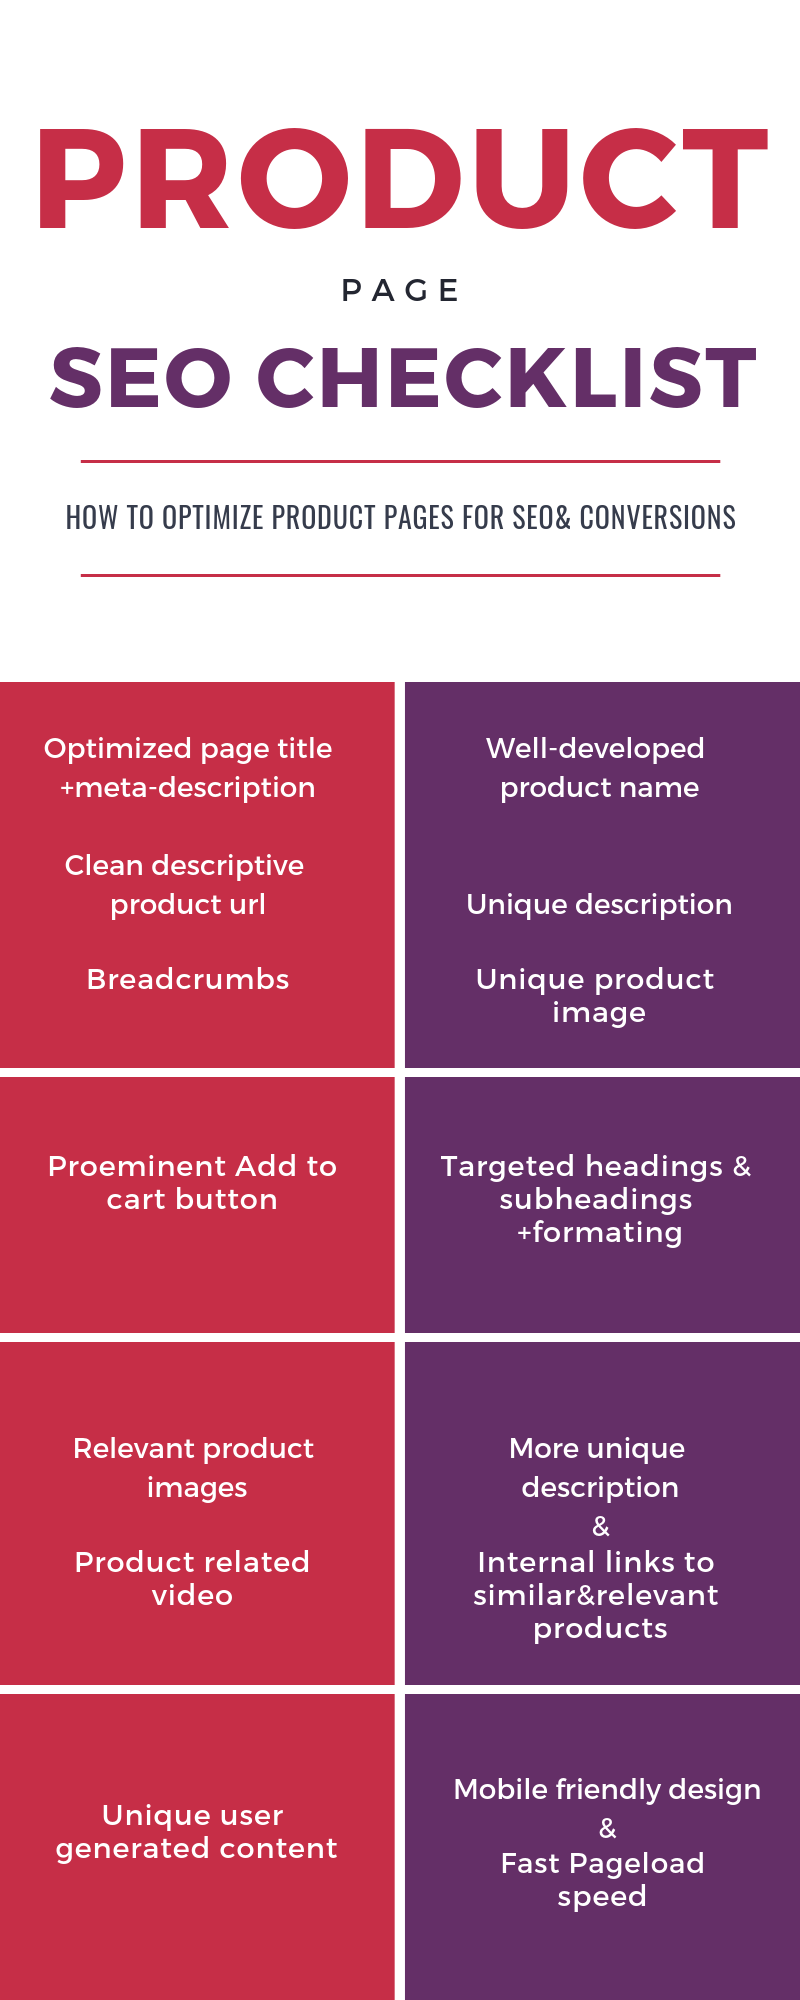 Product page SEO checklist